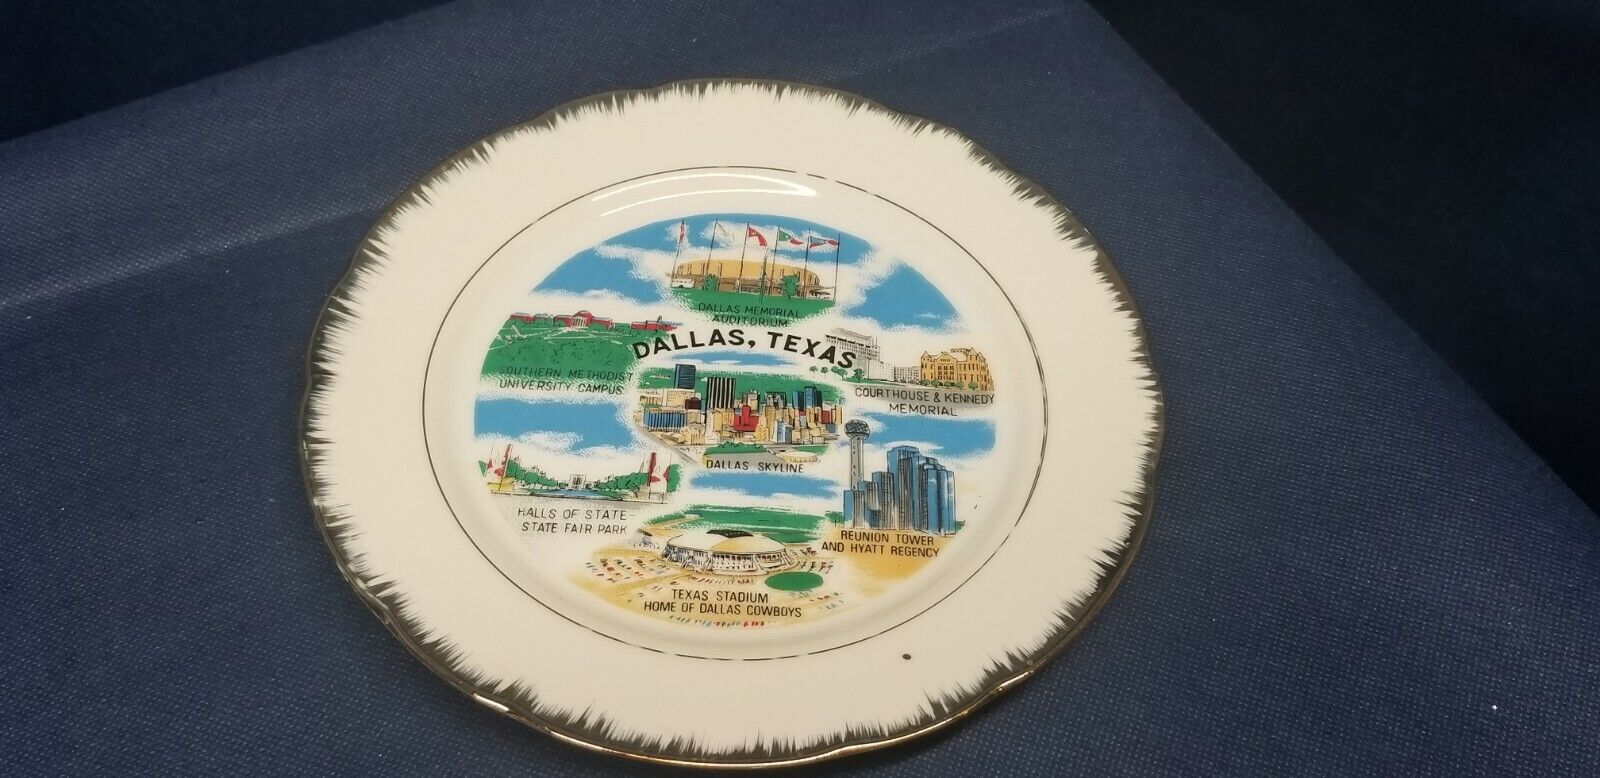 Vintage Collector\'s Plate Of The City Of Dallas Texas with Popular Landmarks 